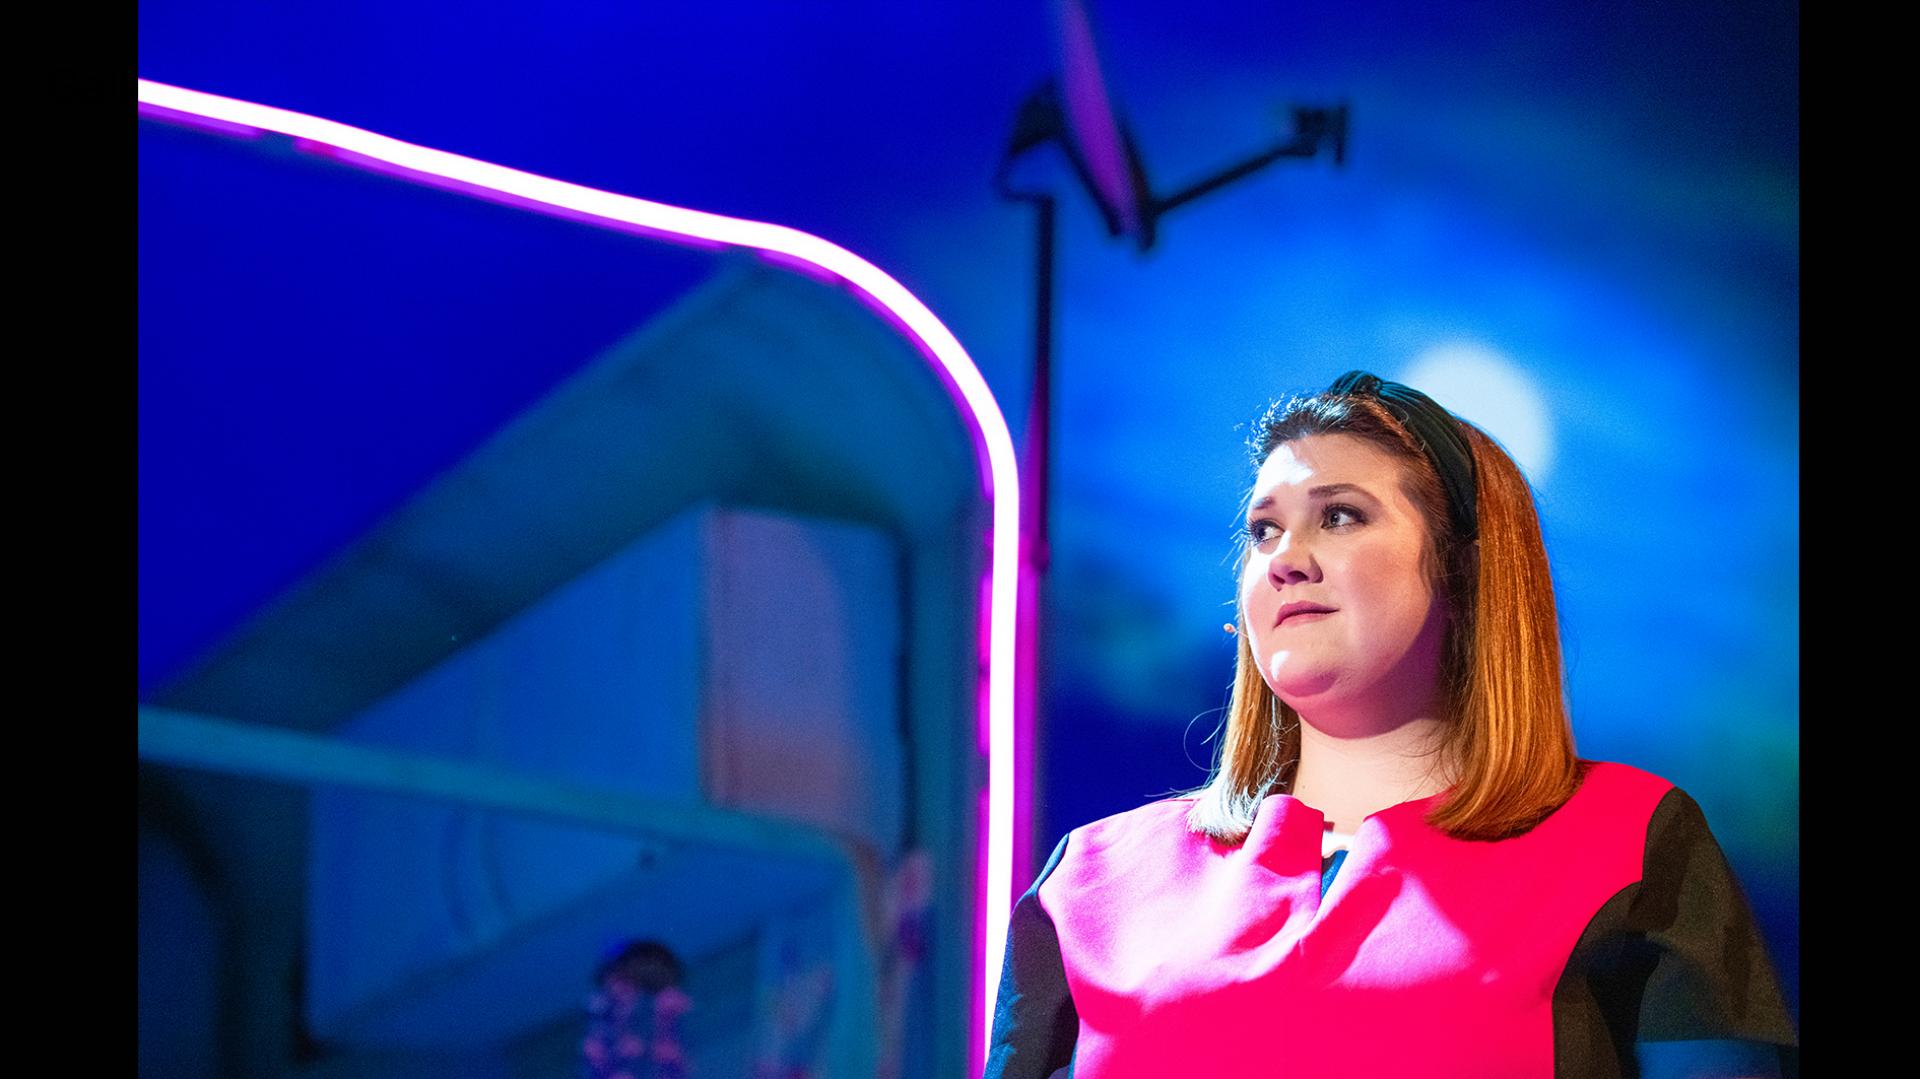 A woman standing in though, wearing a pink tabard with a pink neon light behind